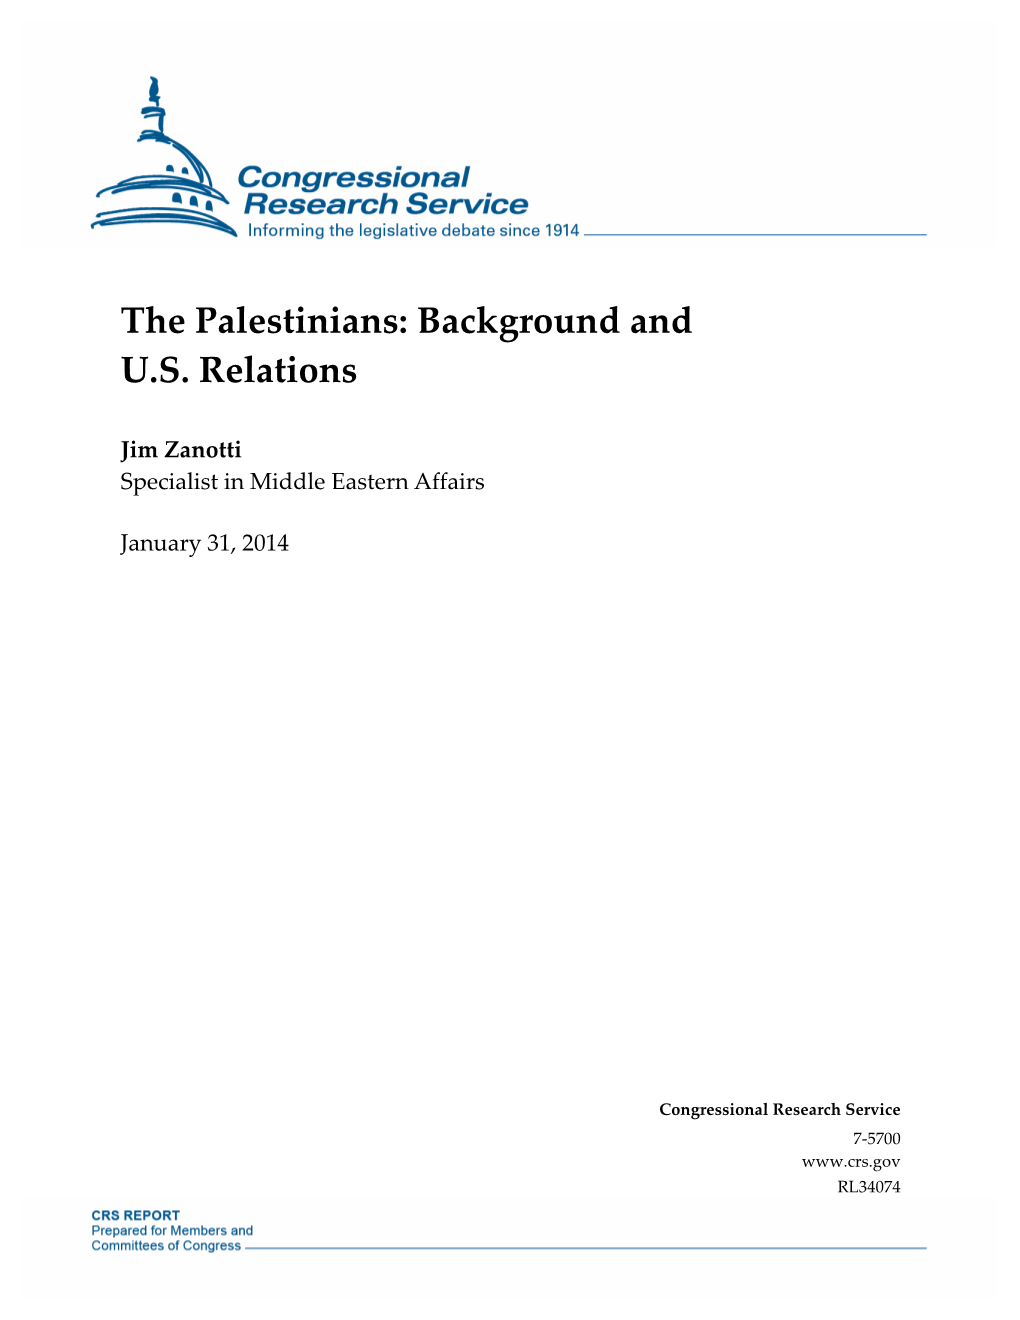 The Palestinians: Background and U.S